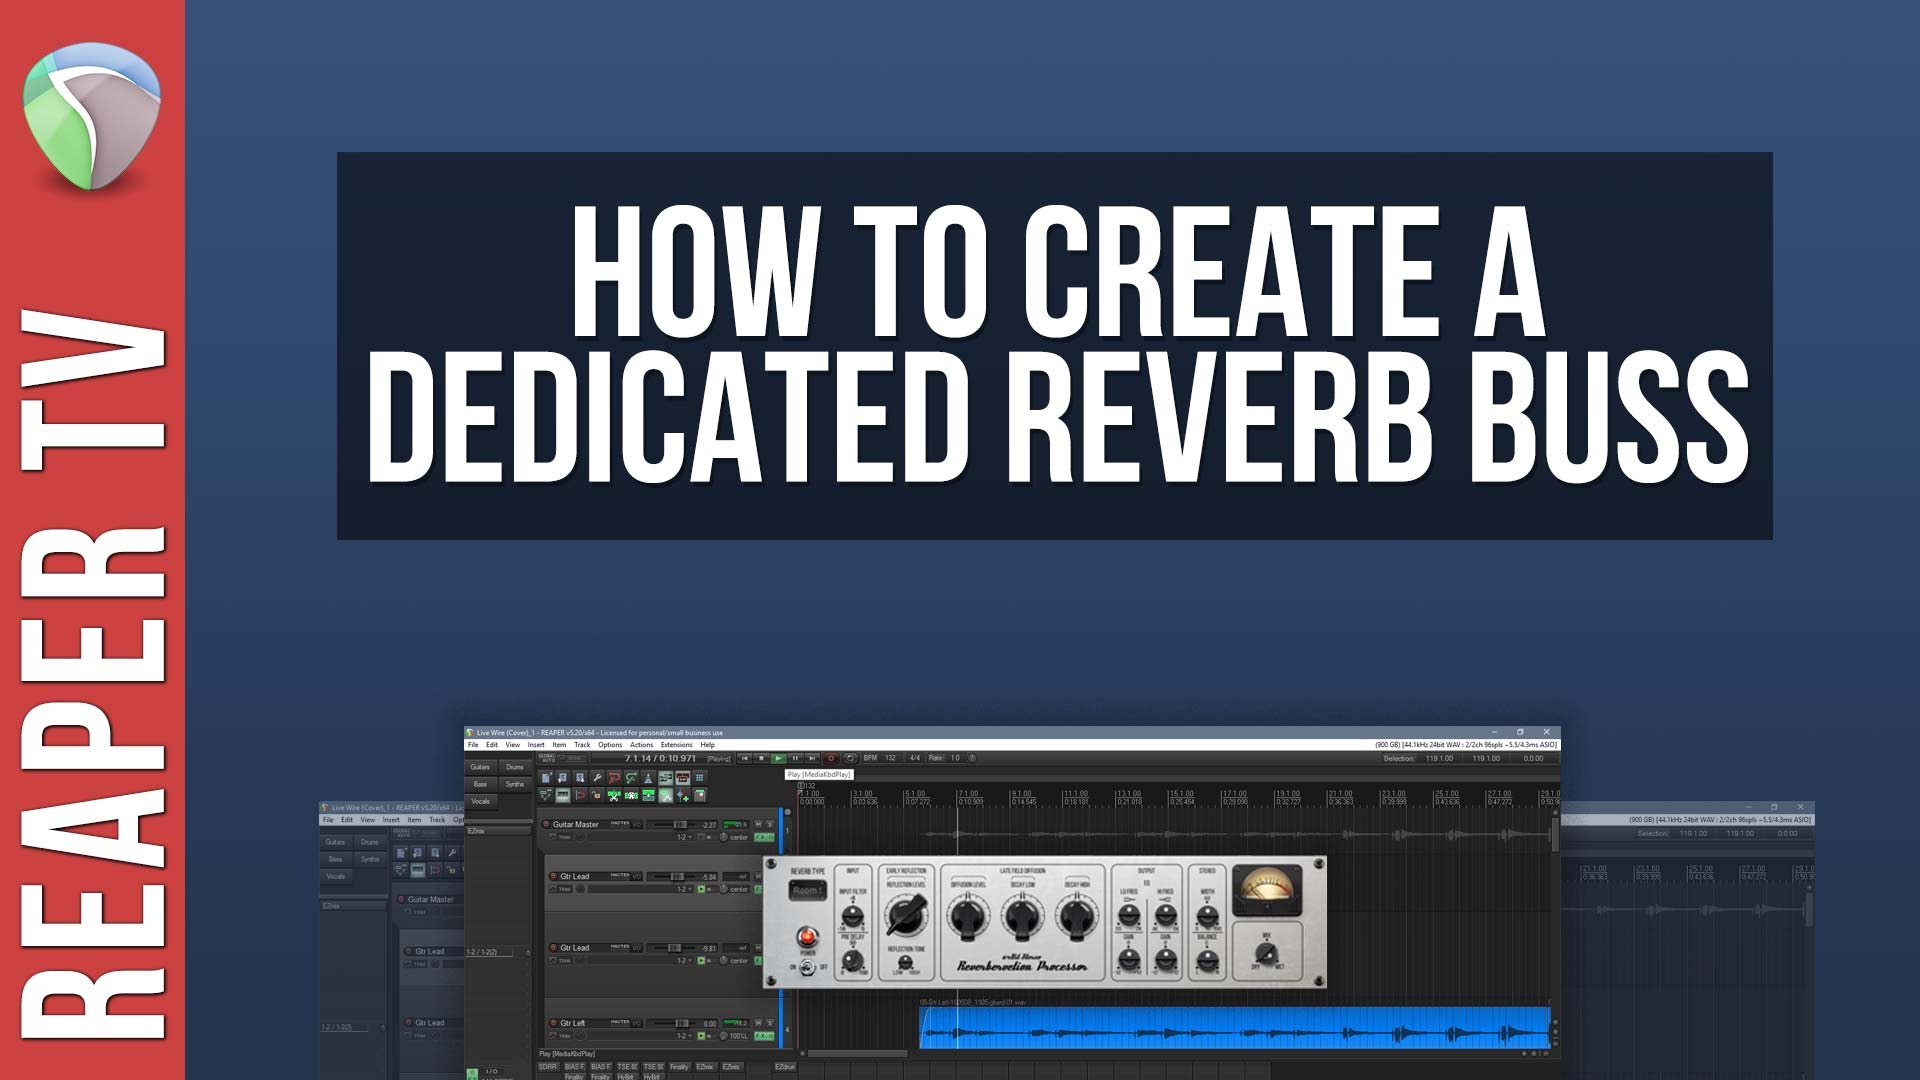 How To Set Up a Dedicated Reverb Buss in Reaper DAW